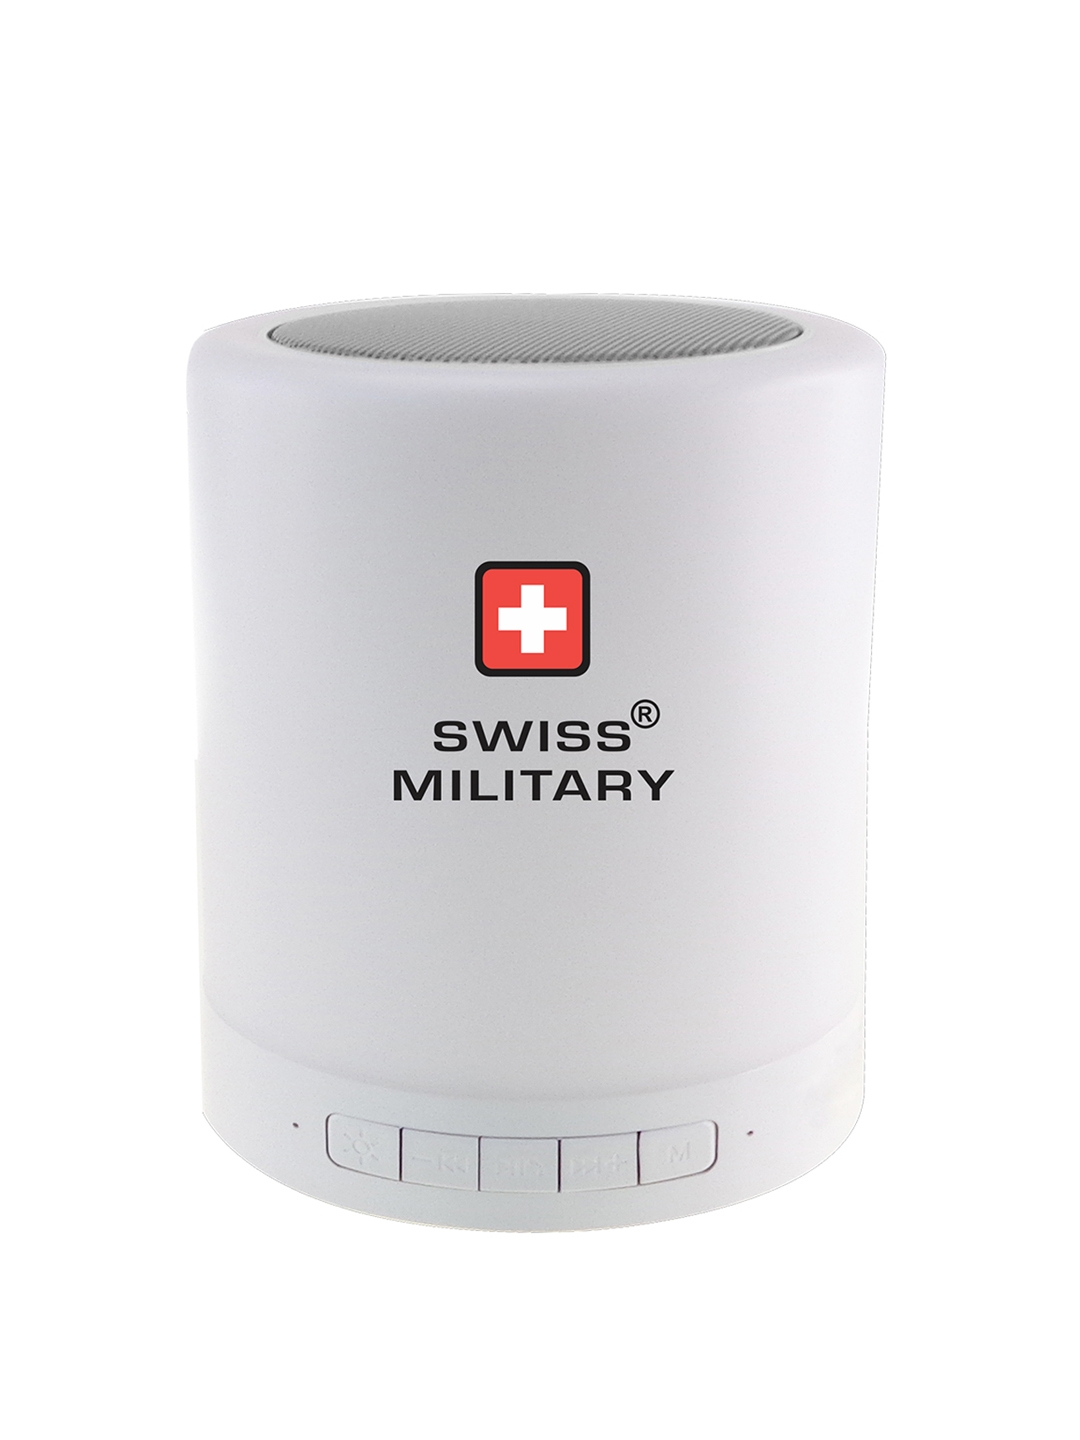 SWISS MILITARY 6 in 1 Smart Torch Lamp Bluetooth Speakers